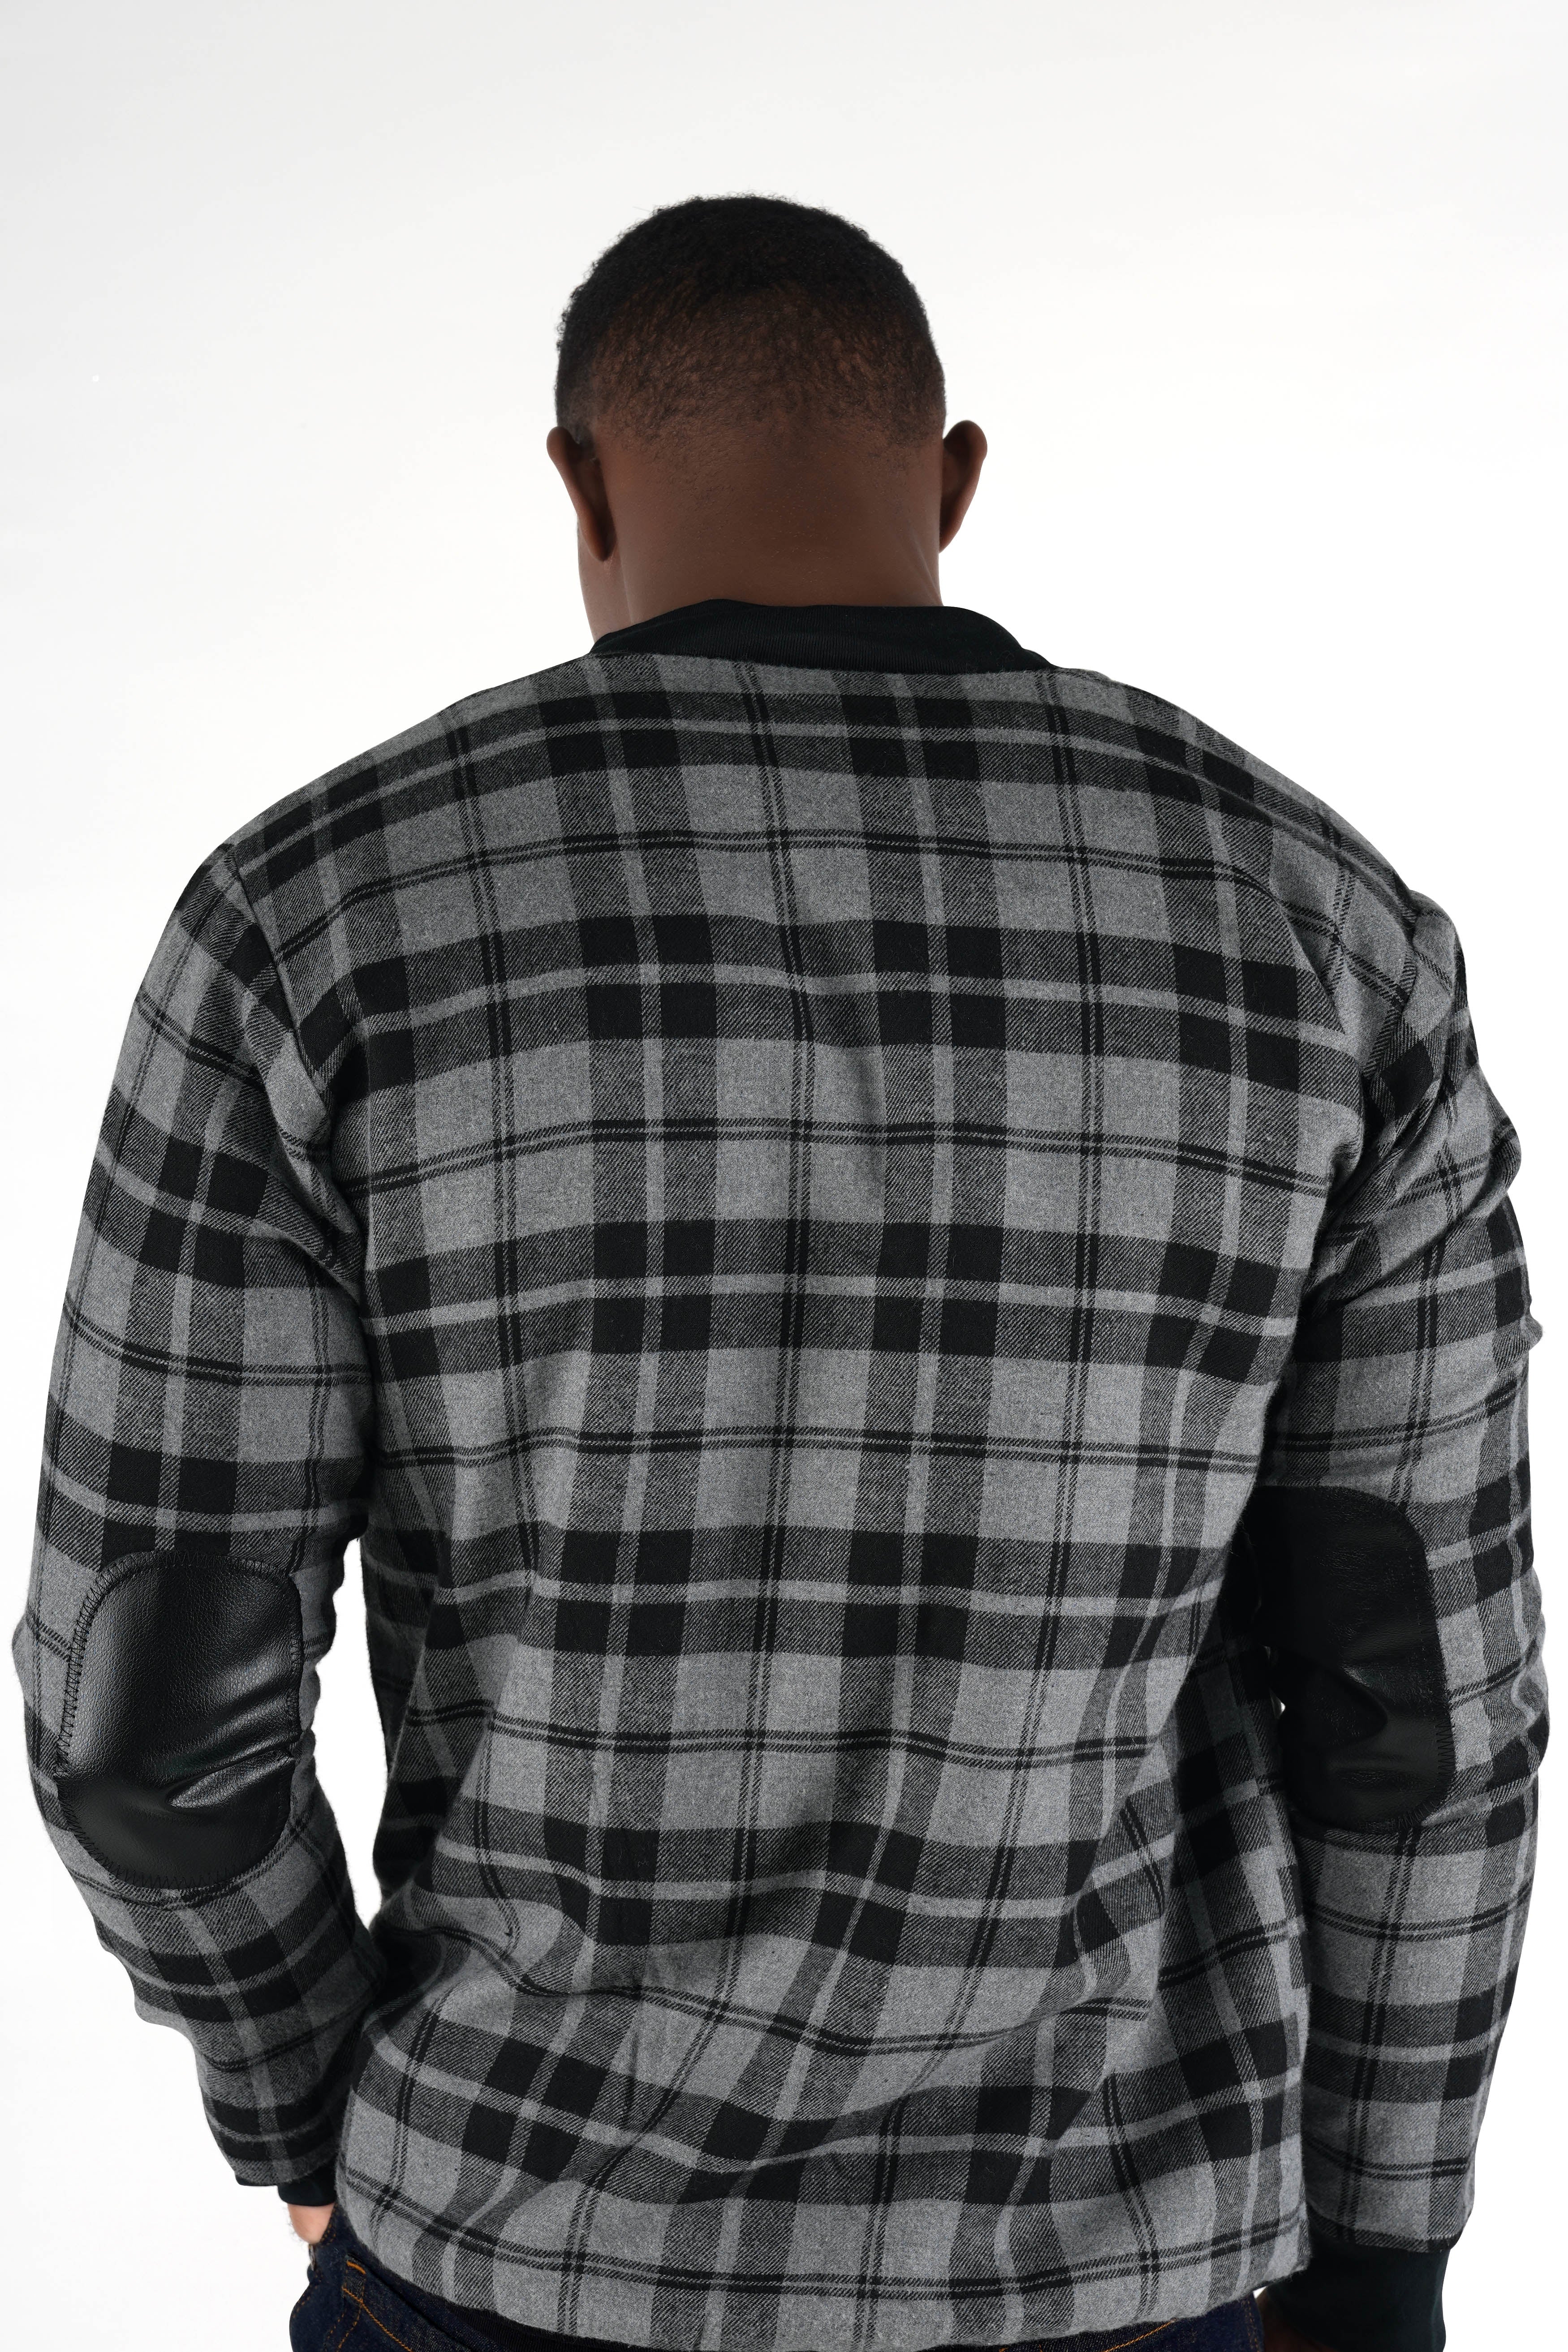 Vensu Gray with Tealish Black Checkered Flannel Bomber Jacket